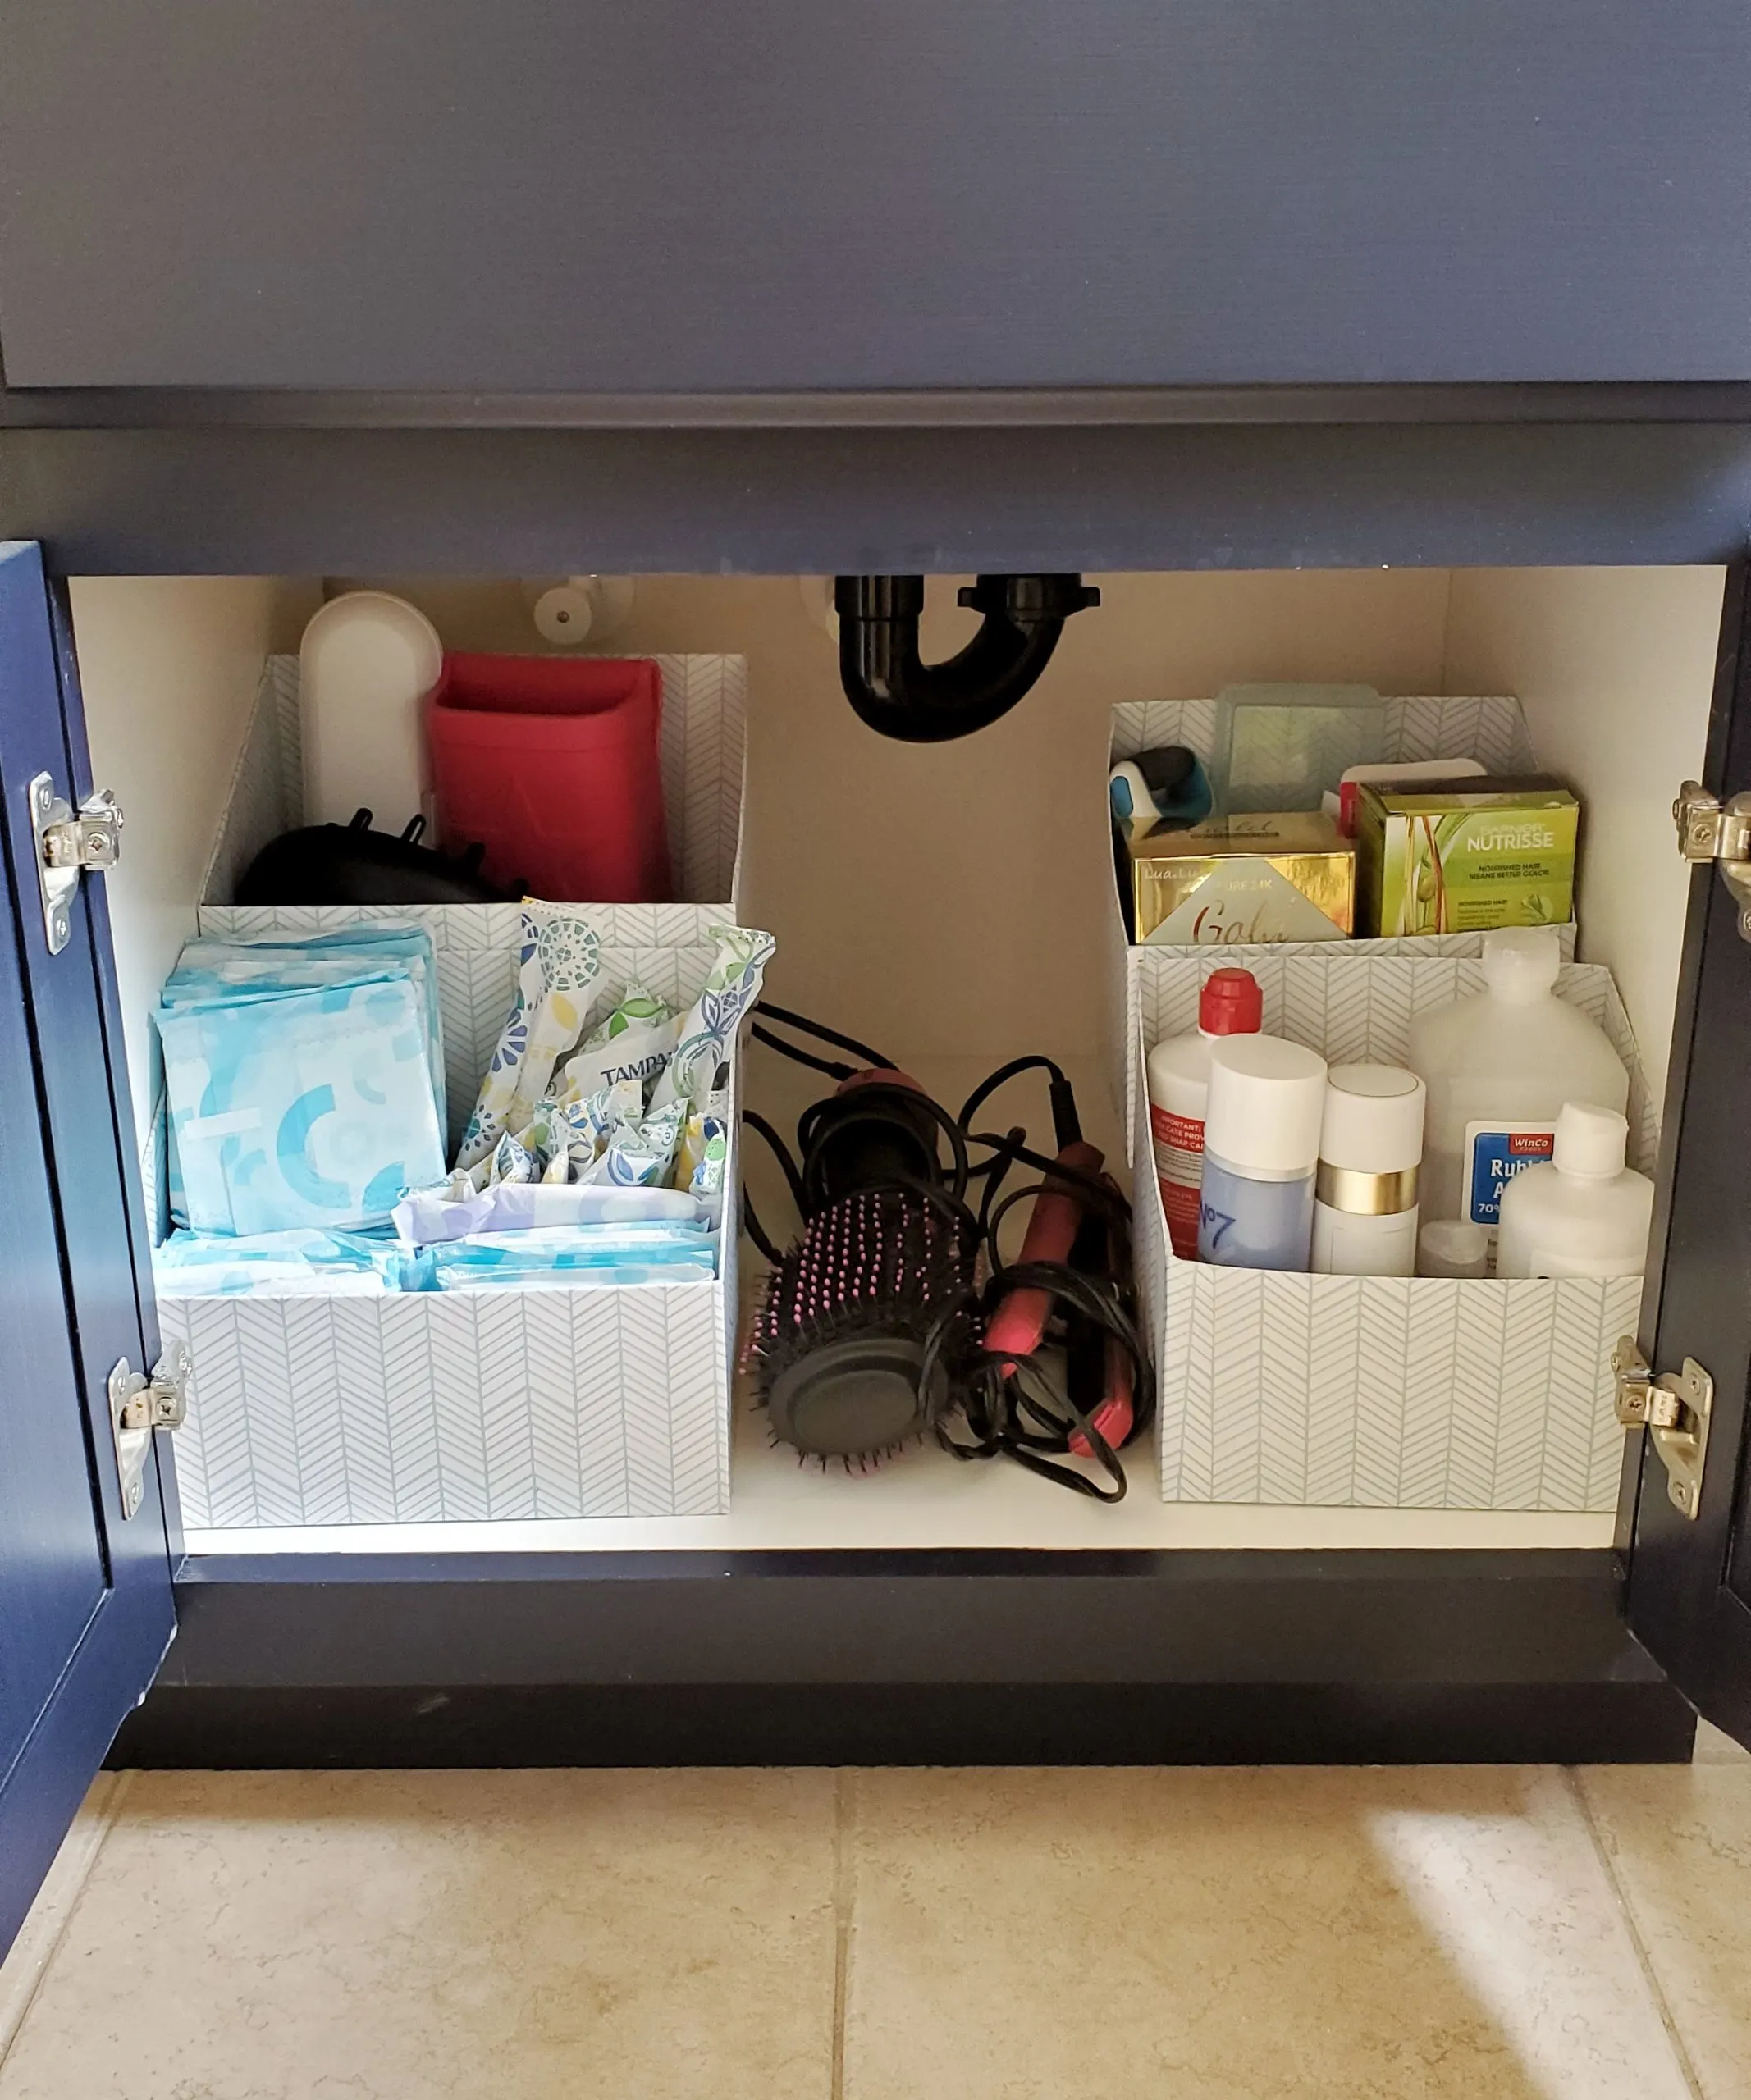 Bathroom Drawer Organizer with Duck Brand Liner - Crafting in the Rain